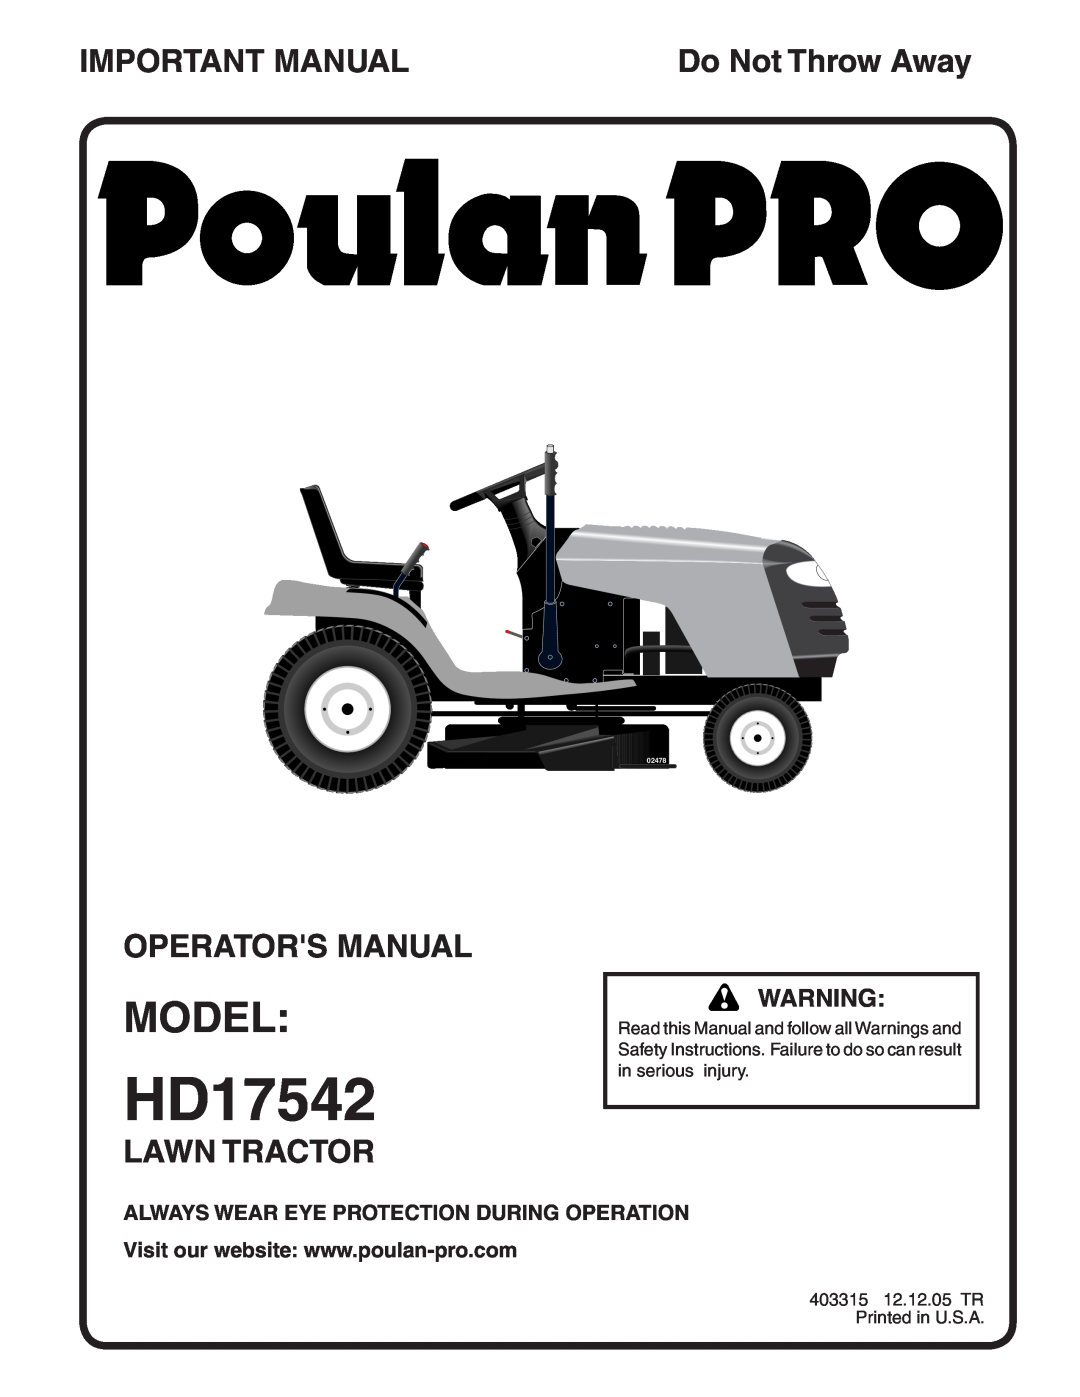 Poulan 403315 manual Model, Important Manual, Operators Manual, Lawn Tractor, Always Wear Eye Protection During Operation 